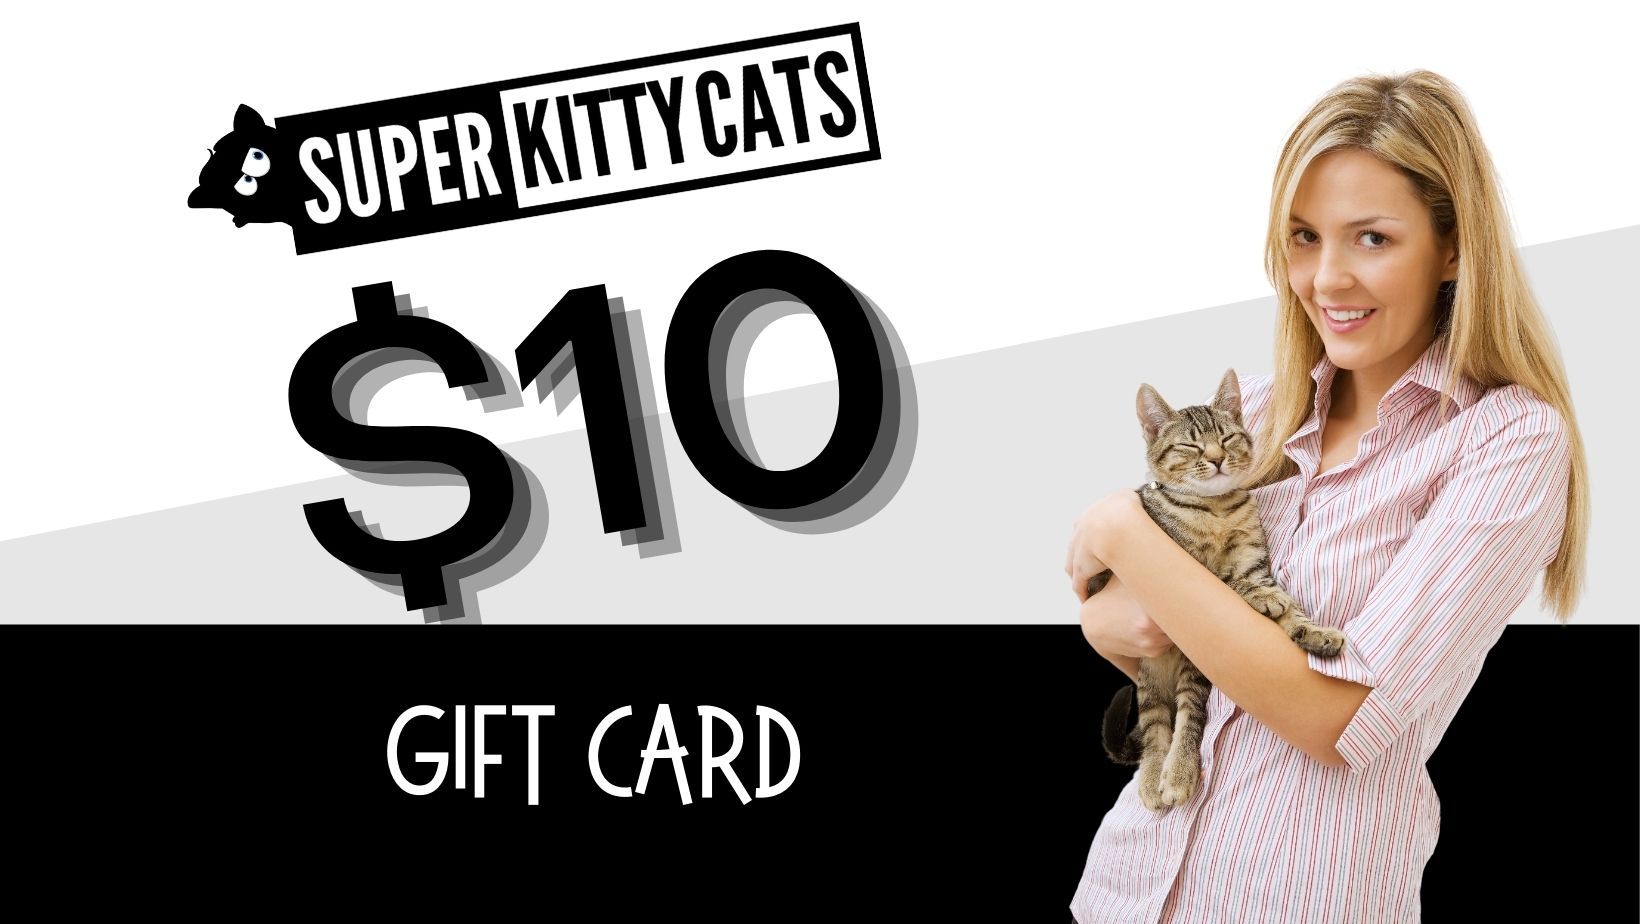 10% OFF Gift Vouchers Super Kitty Cats US$10.00 